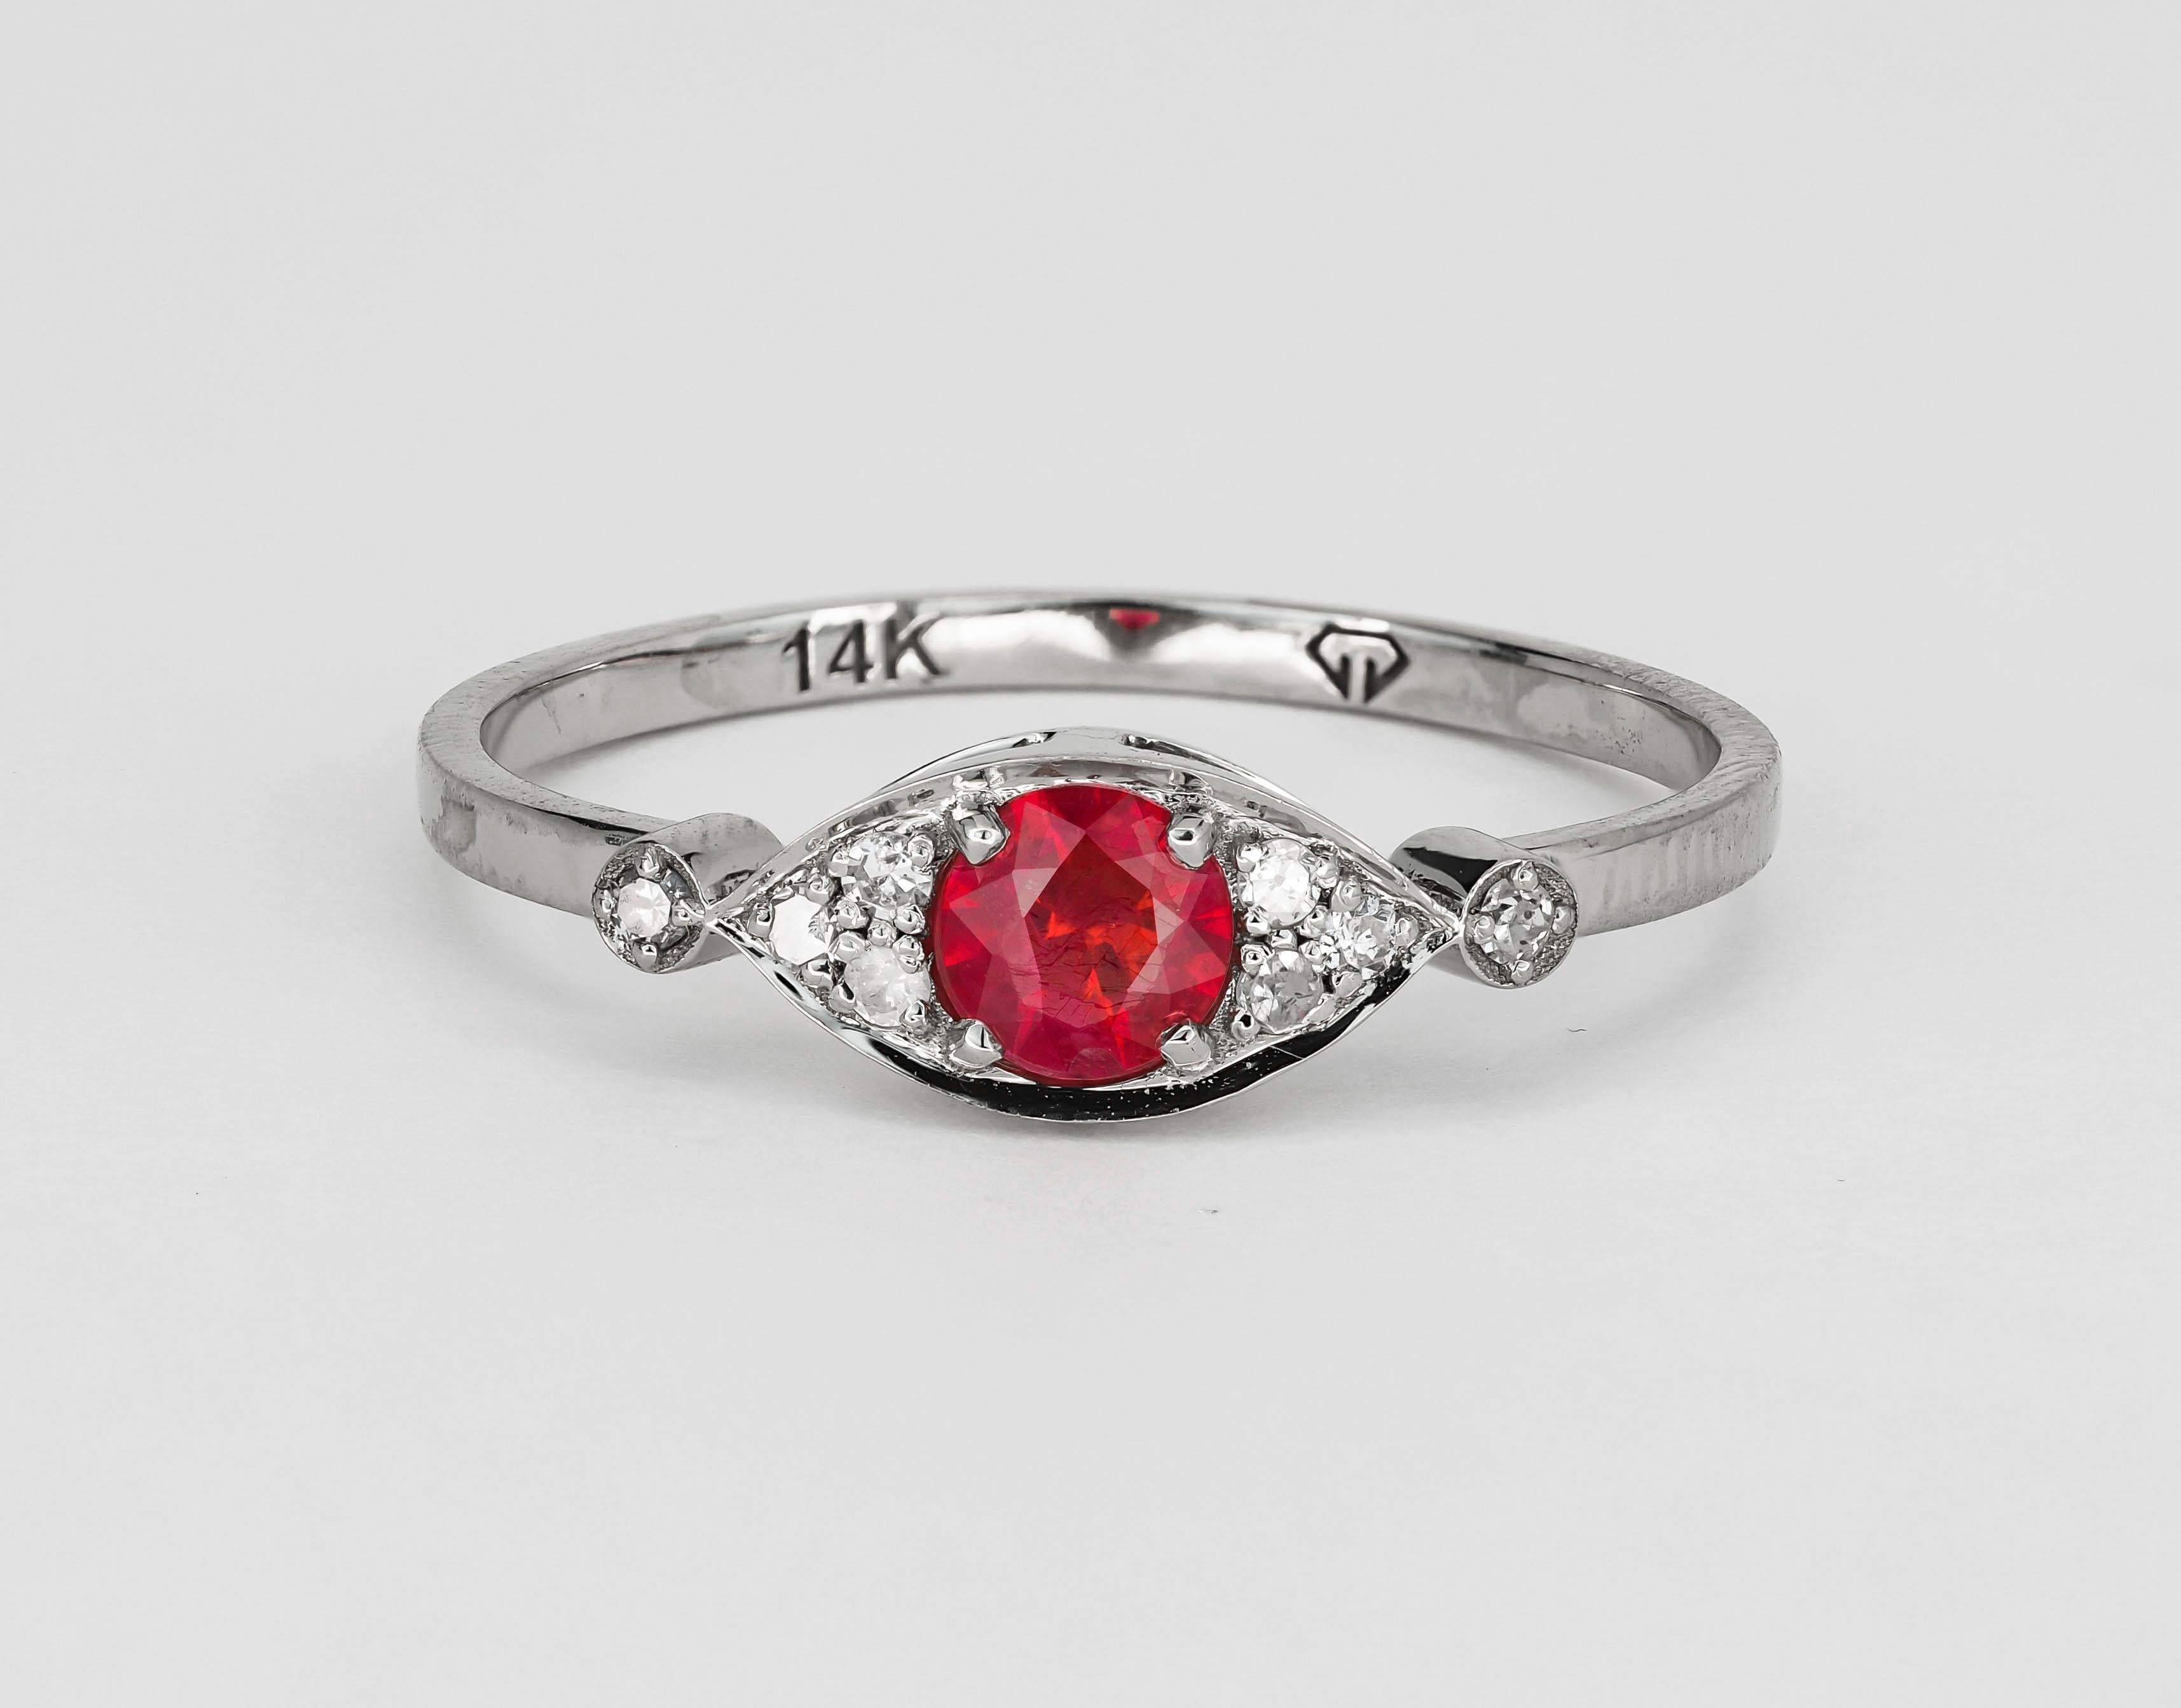 For Sale:  14 karat Gold Ring with Ruby and Diamonds.  